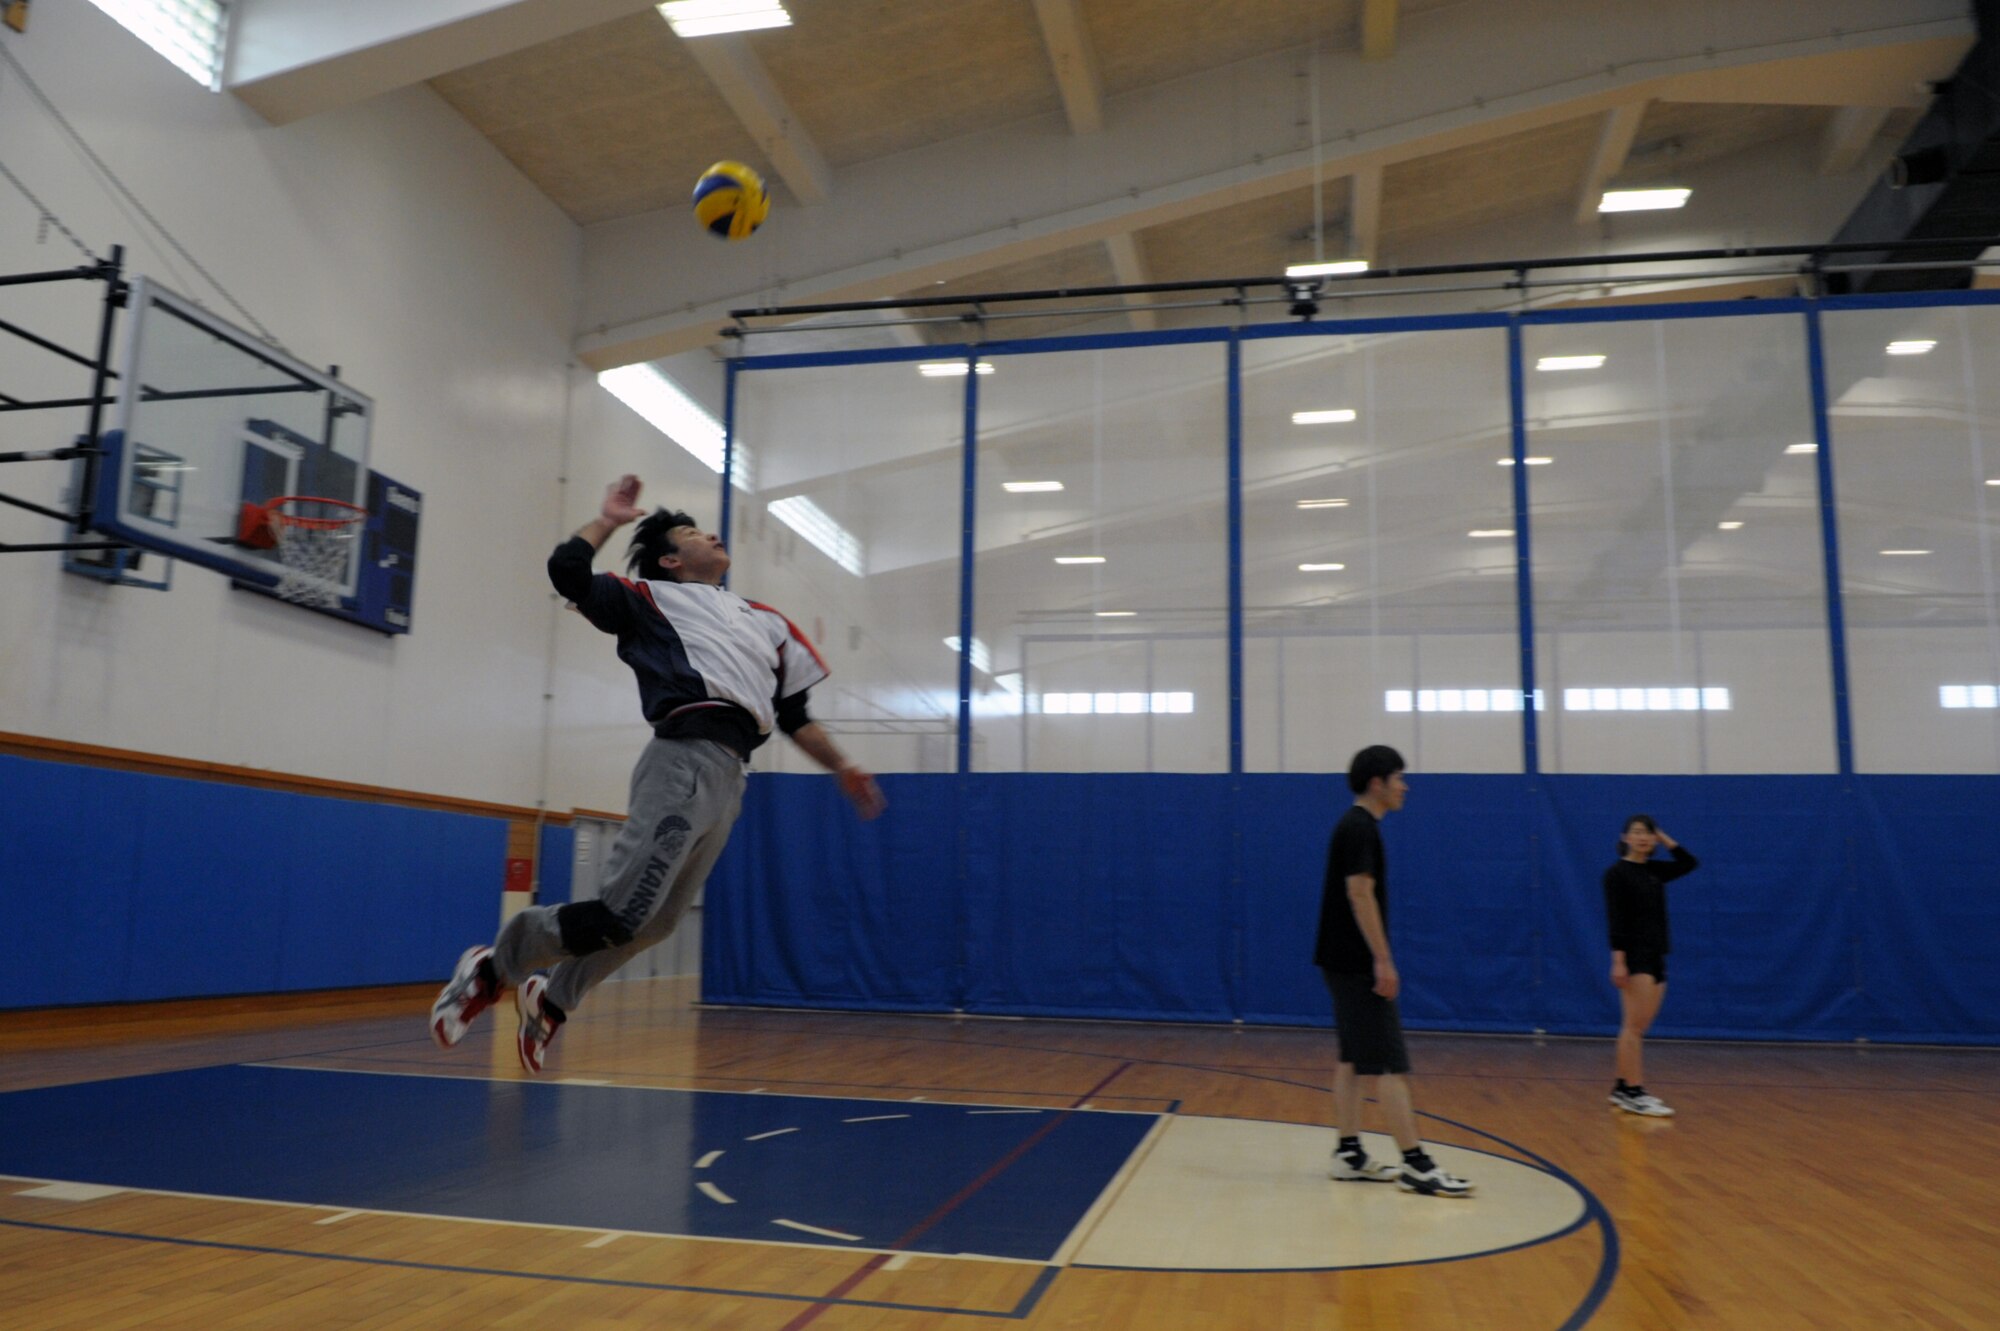 Katsuhiko Nakachi, chief of directors for the Okinawa City Volleyball Association, jump serves during an invitational volleyball tournament Feb. 28, 2015, at Kadena Air Base, Japan. Members of the Company Grade Officer Council and Airmen Committed to Excellence invited two Japanese teams to the base for a day of sportsmanship and camaraderie. (U.S. Air Force photo by Tim Flack)